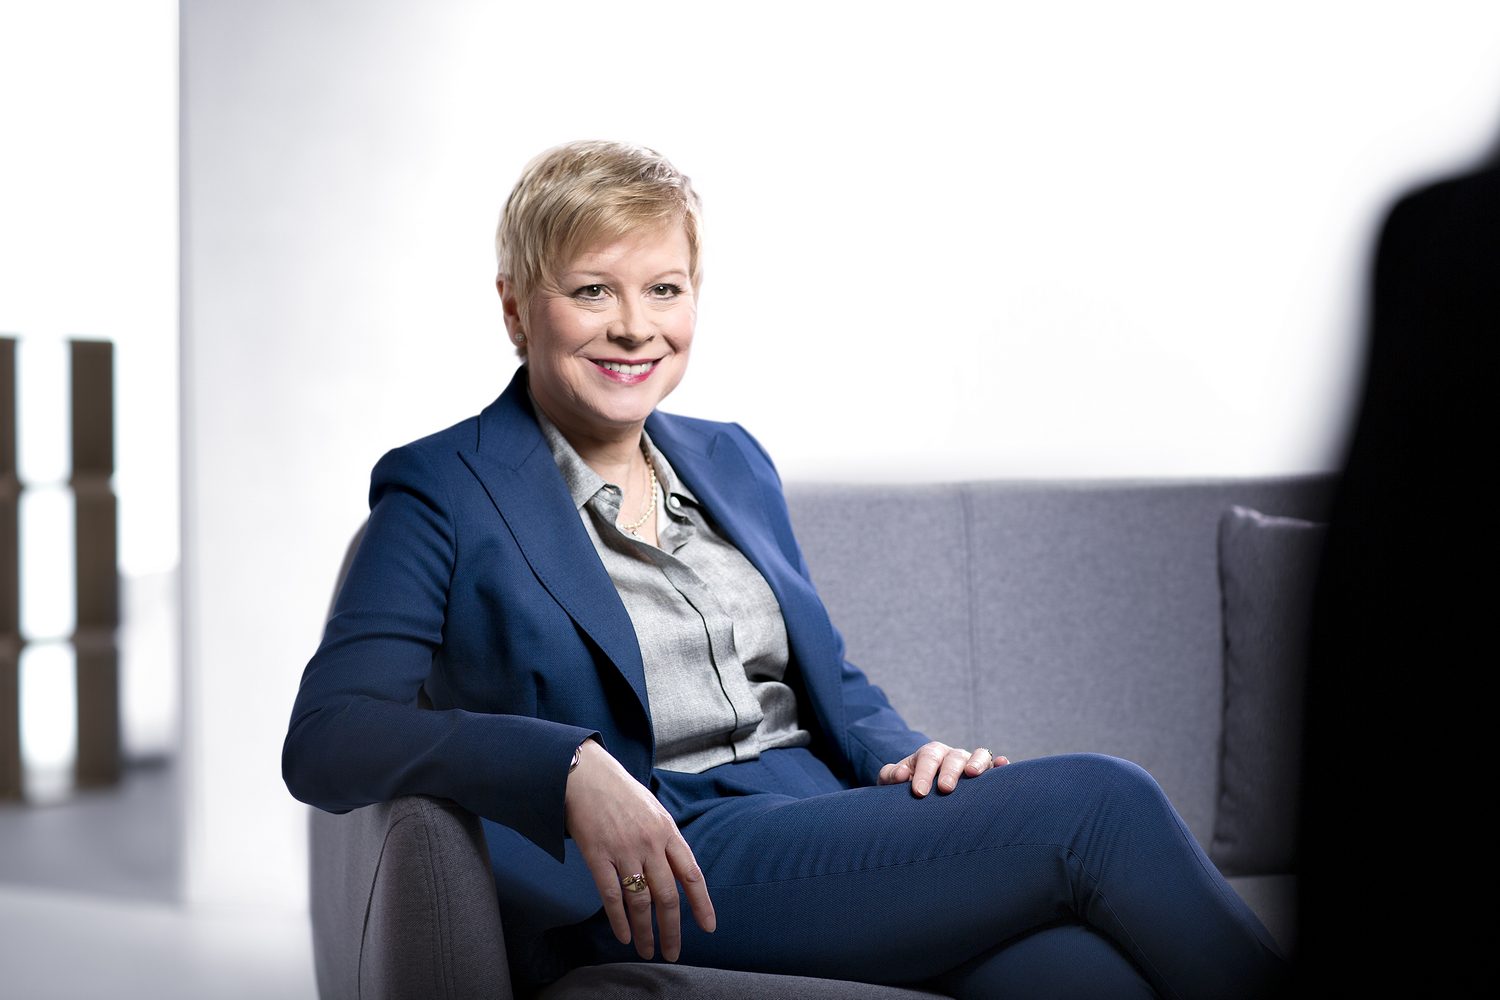 Interview with Linda Jackson, CEO of Peugeot